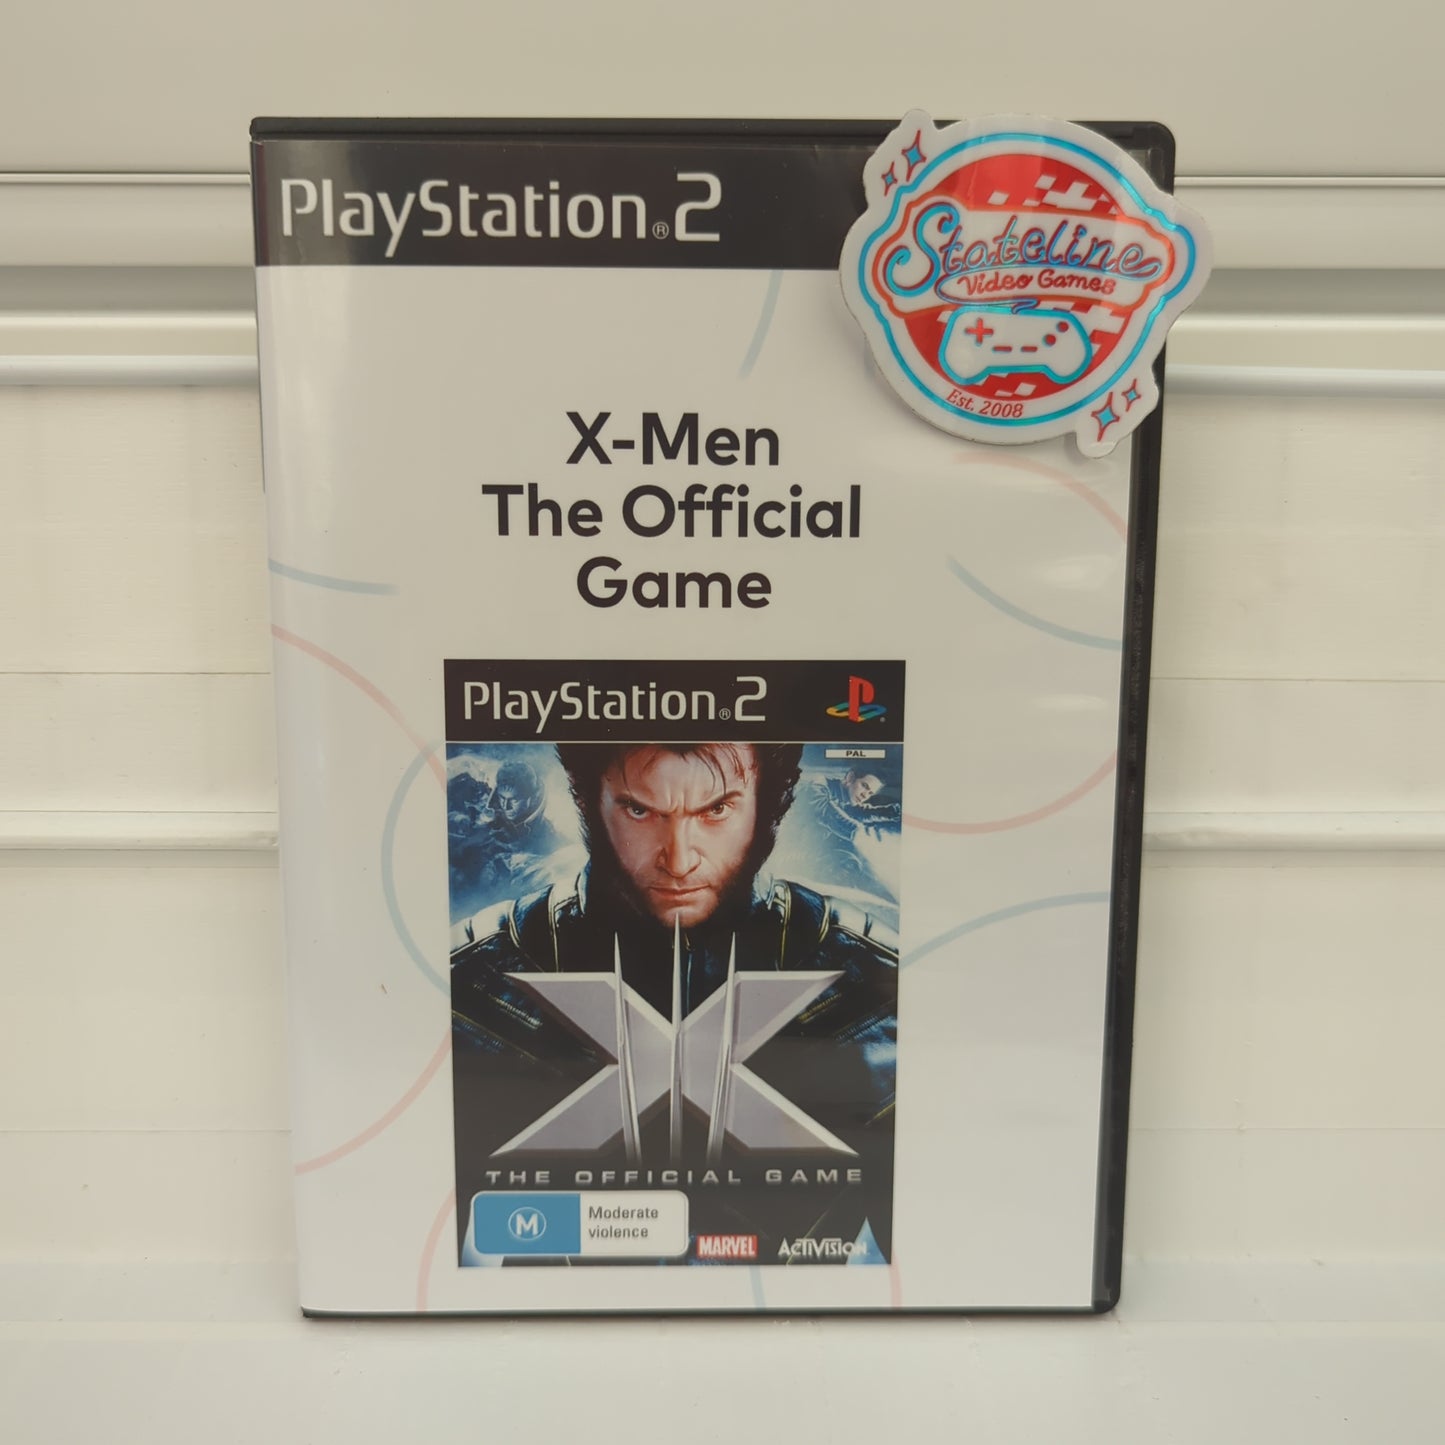 X-Men: The Official Game - Playstation 2